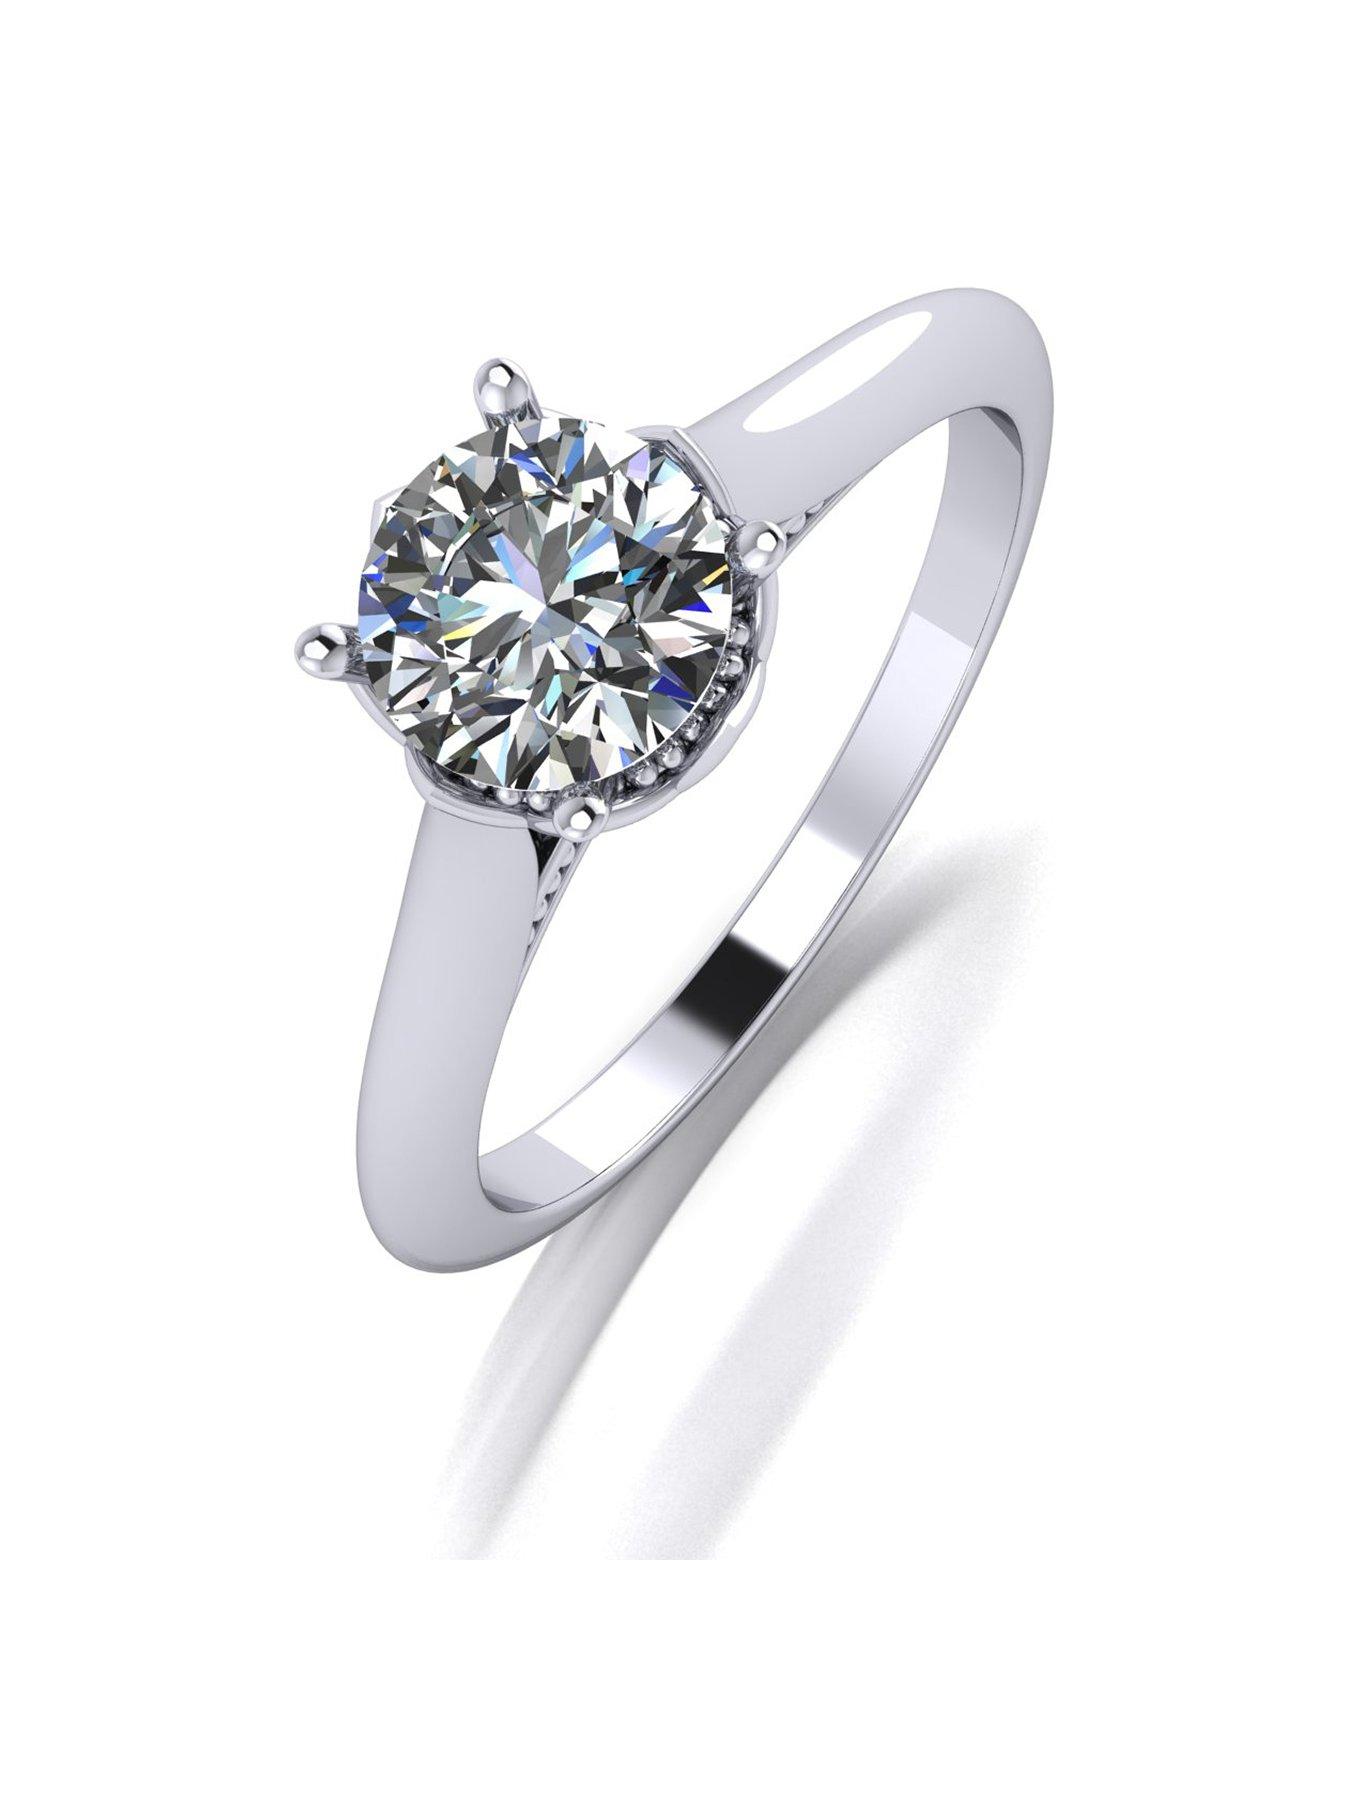 Women LIMITED EDITION MOISSANITE PLATINUM CROWN SOLITAIRE RING FEATURING THE QUEENS 70TH HALLMARK